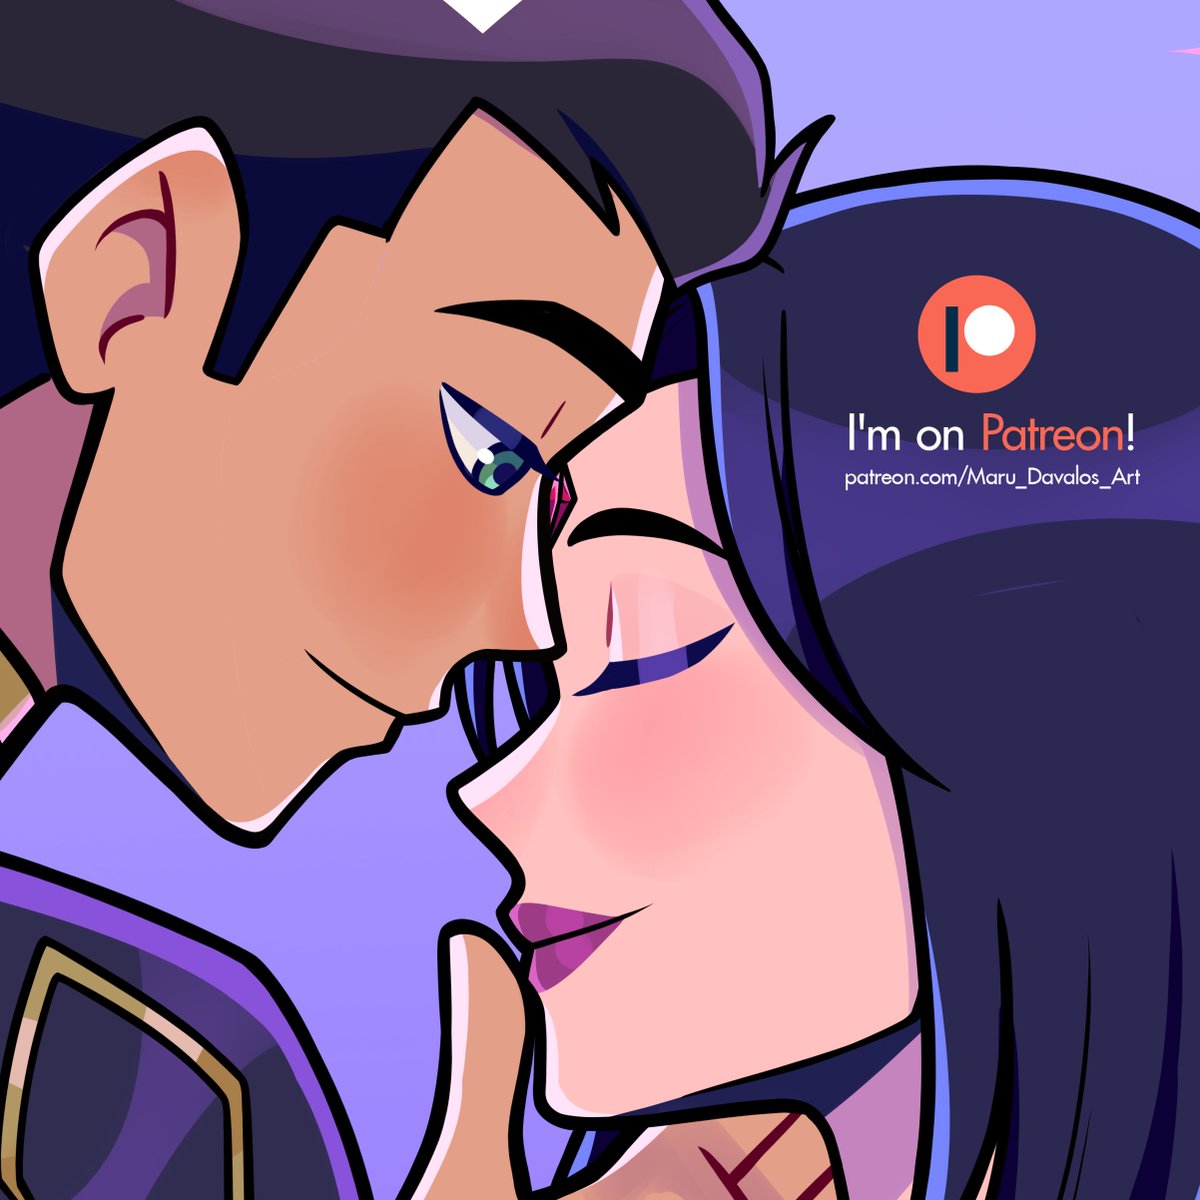 It's still the month of love!
Here is one of my favorite couples😍
Damian Wayne and Raven💜❤️
#happyvalentinesday #happyvalentine #DC #batman #damianwayne #raven